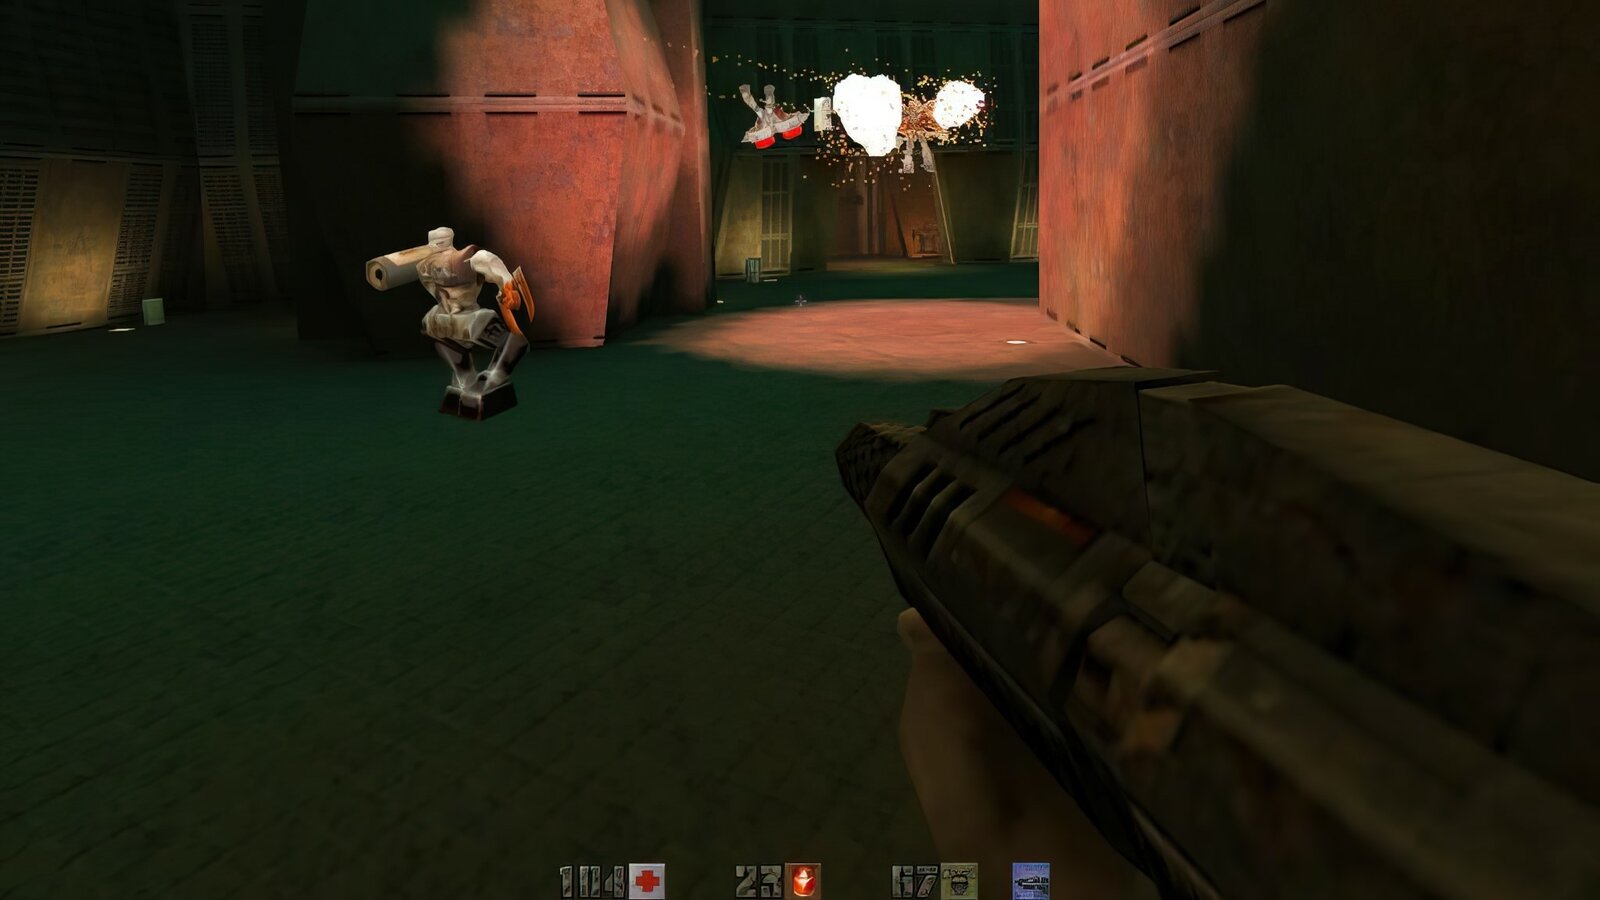 Quake II: Mission Pack - The Reckoning